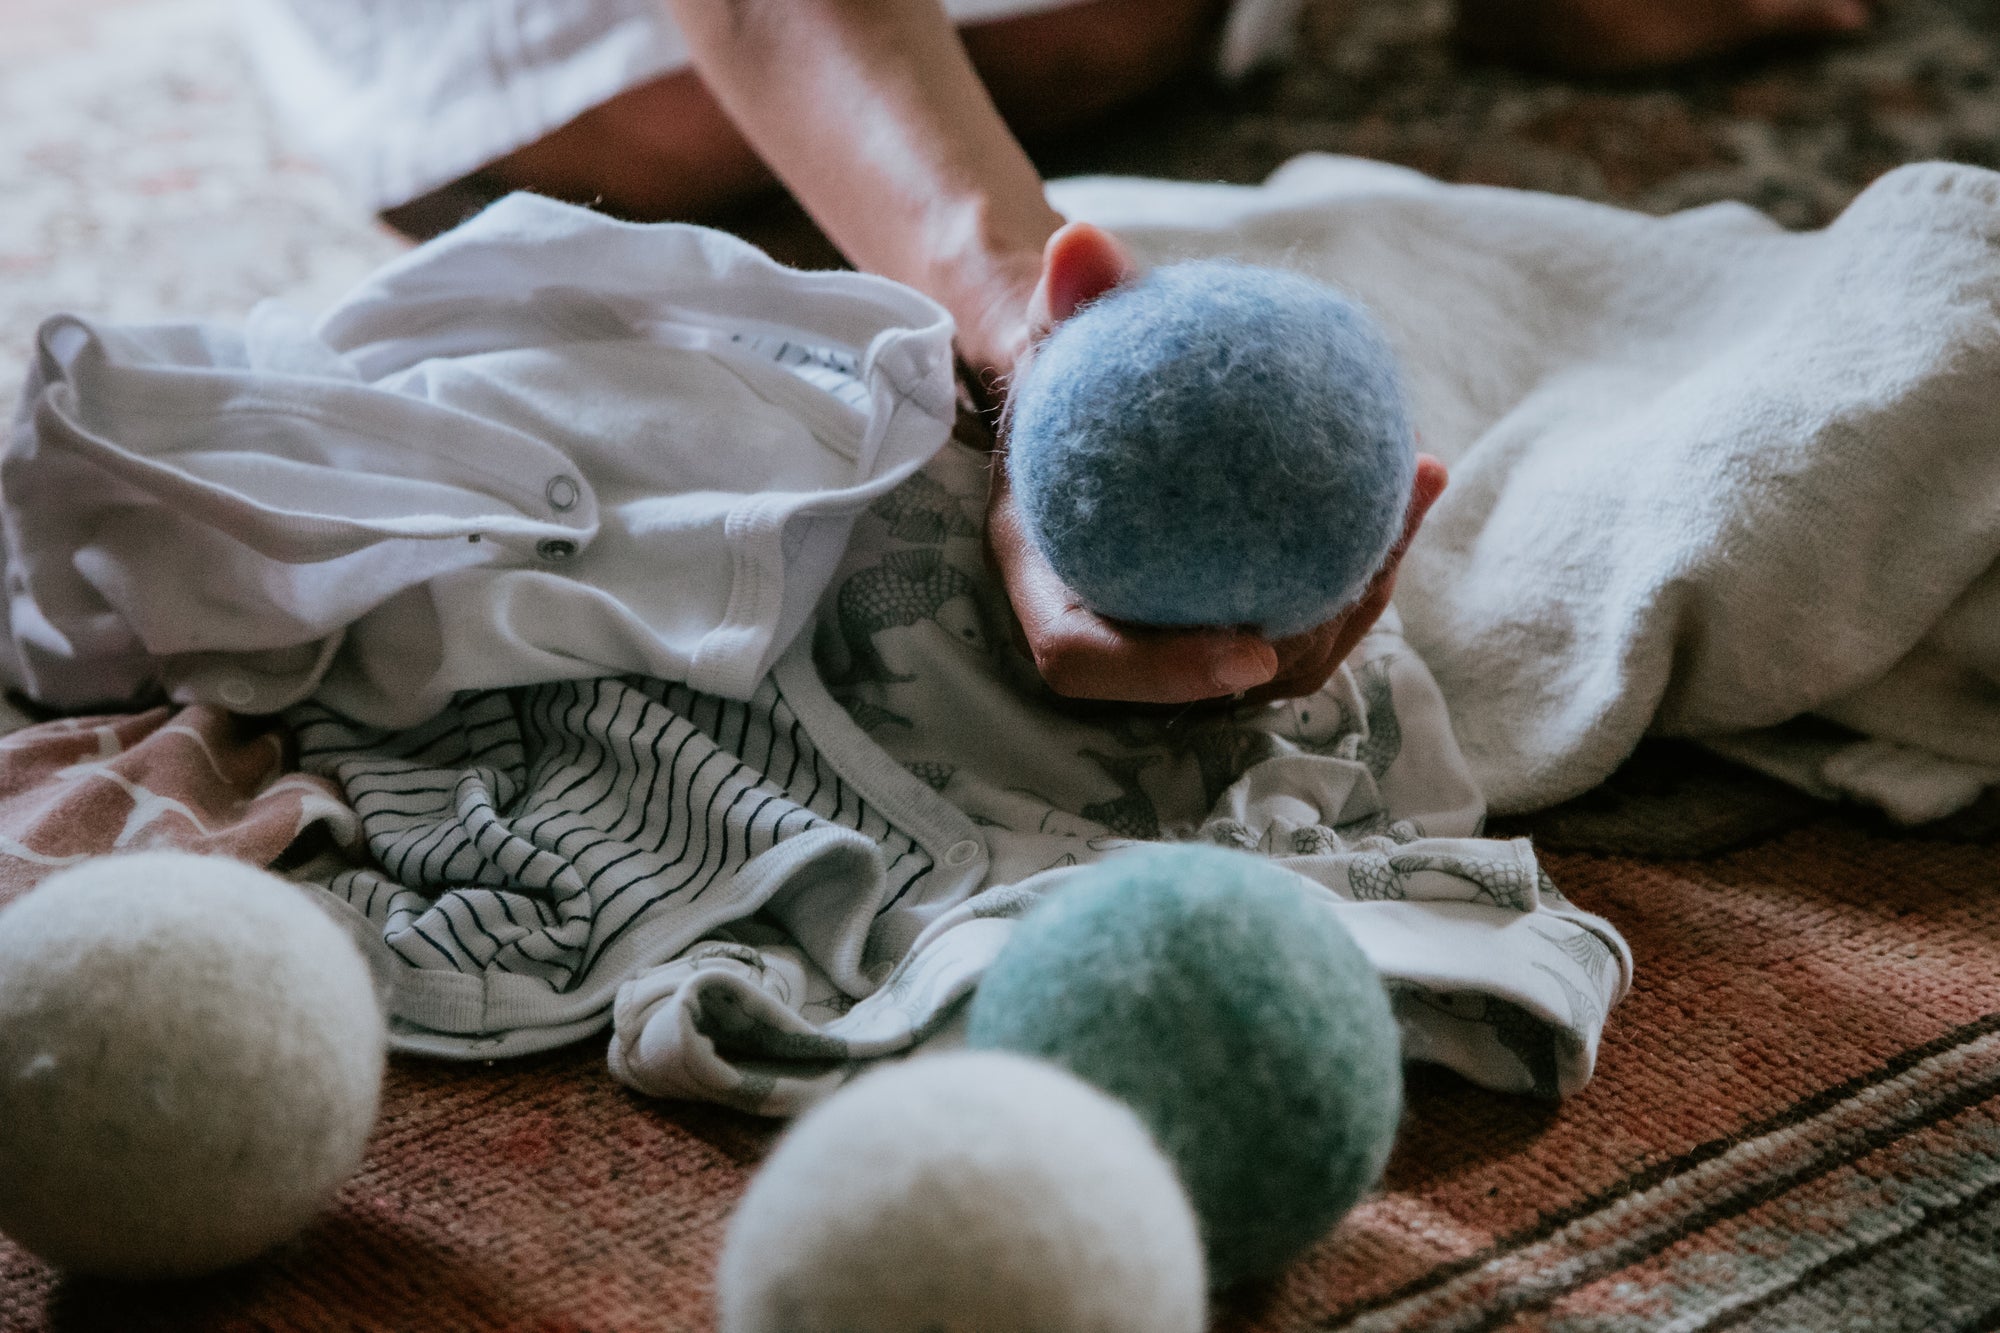 Want Not Waste: 5 Ways to Reuse Wool Dryer Balls